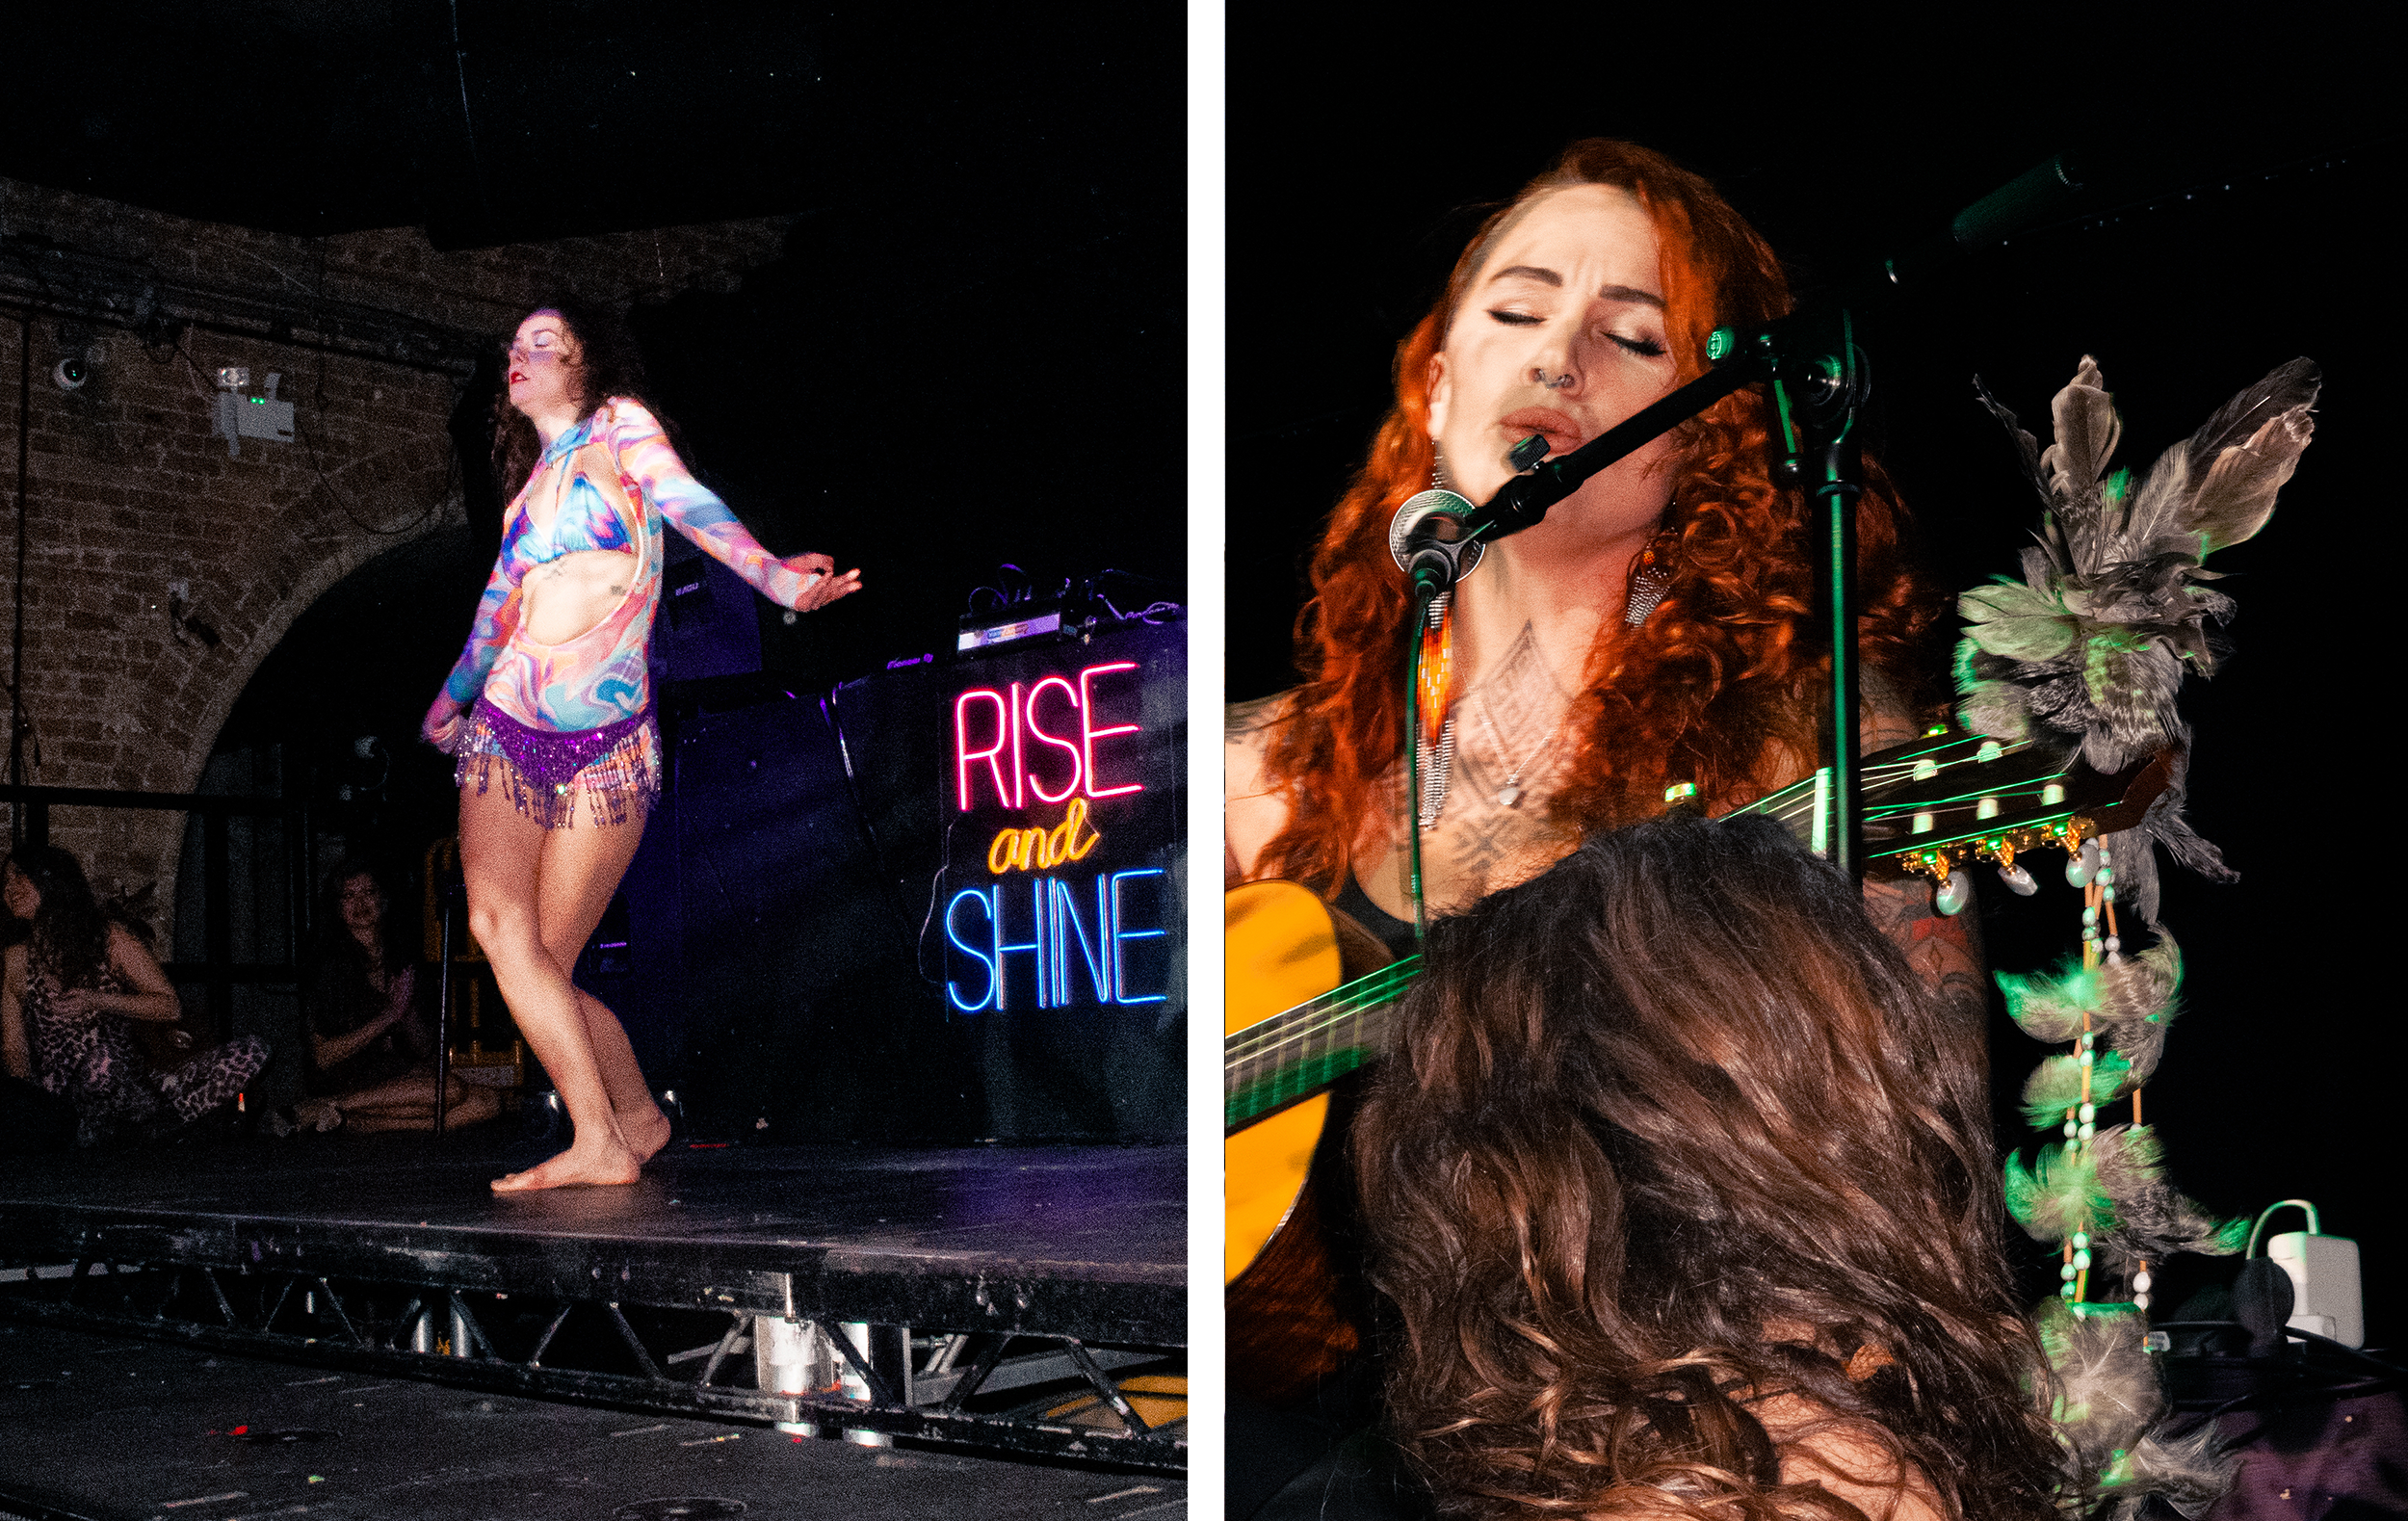 Left: A photo of a woman in a cosmic, multicoloured leotard dancing on a stage. Right: A woman with red curly hair singing with a guitar decorated in feathers.